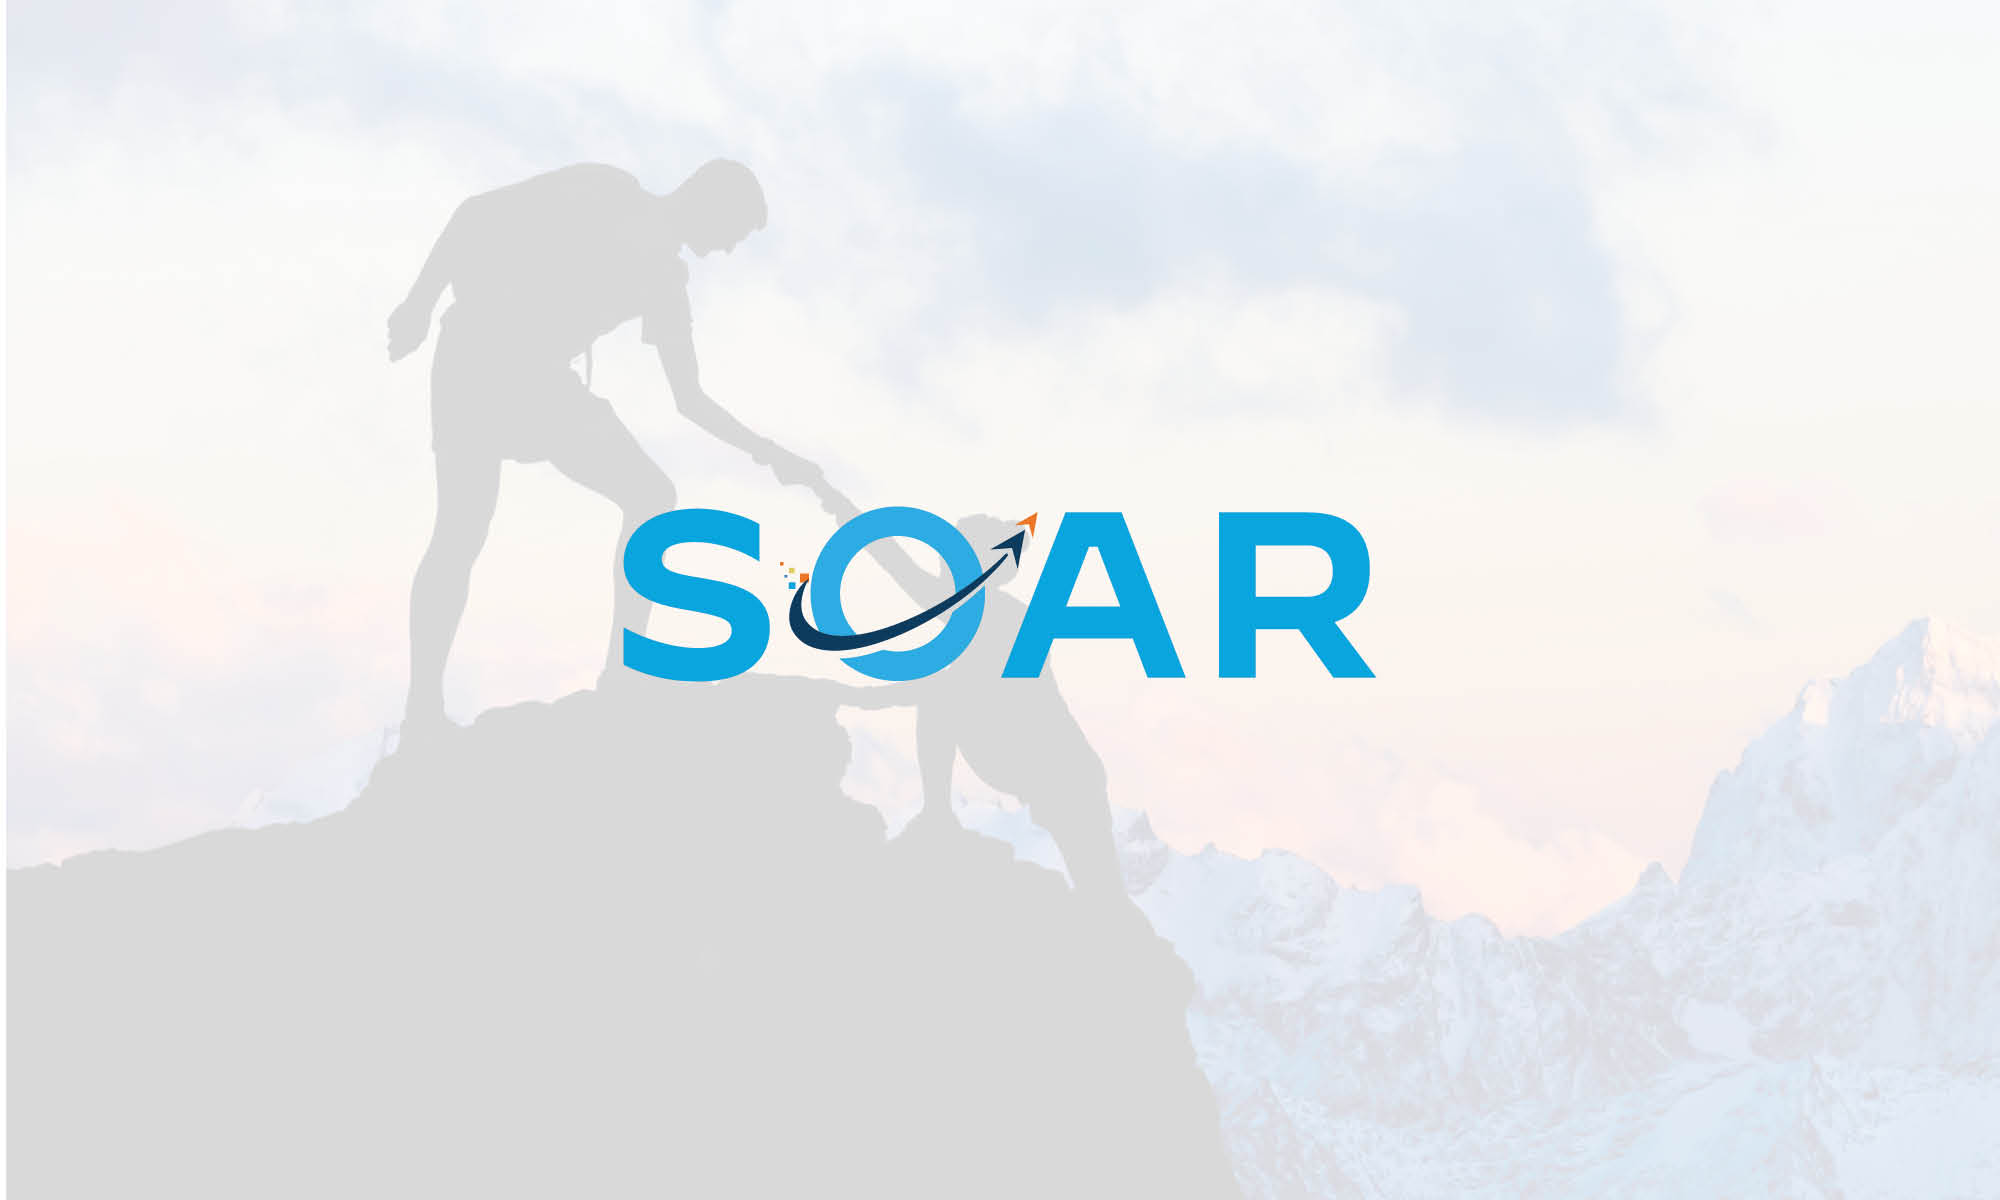 SOAR: Learn more about RP’s Mentorship Program for Radiology Residents and Fellows